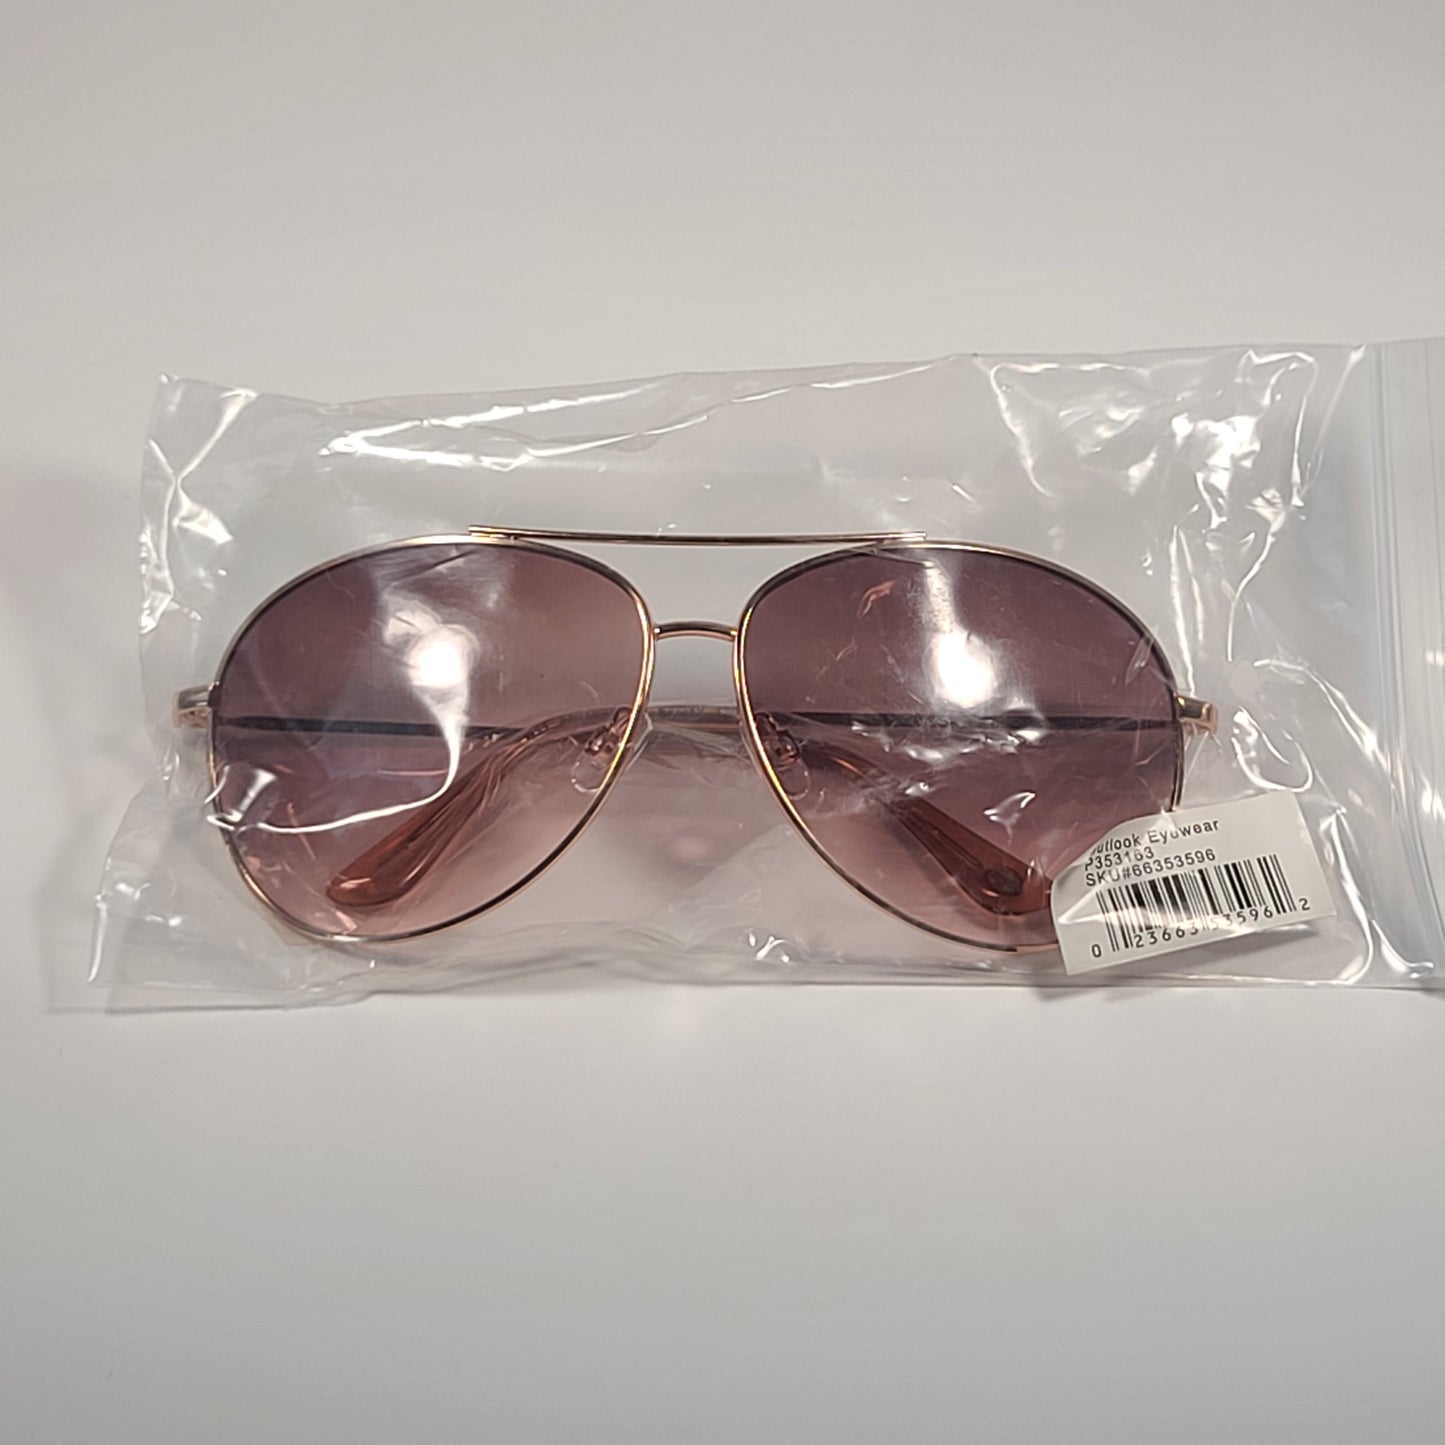 Fossil Aviator Sunglasses Rose Gold Frame Large Lens Brown Pink Gradient FW11 - Sunglasses